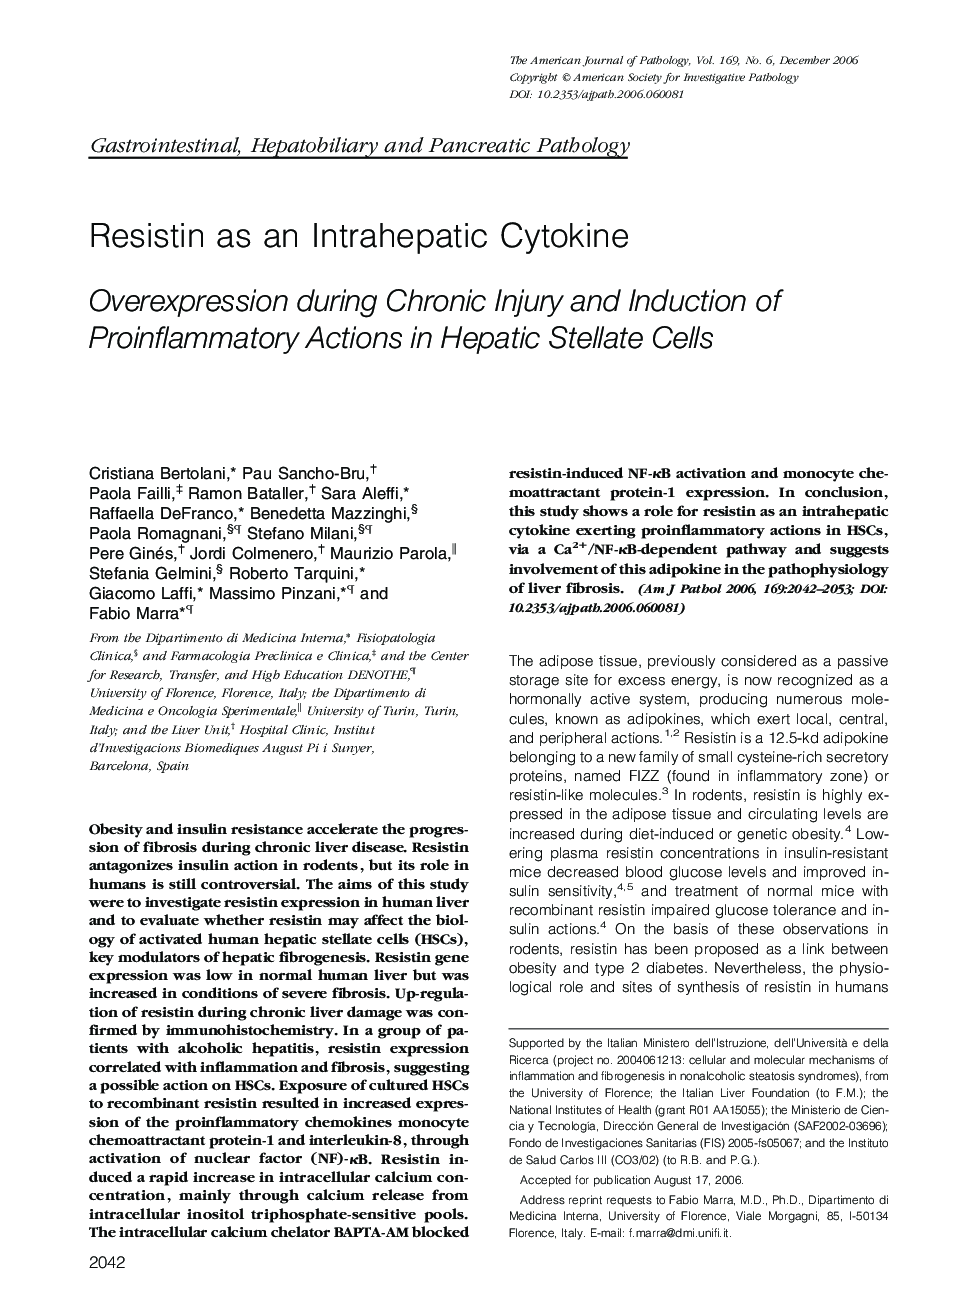 Resistin as an Intrahepatic Cytokine : Overexpression during Chronic Injury and Induction of Proinflammatory Actions in Hepatic Stellate Cells